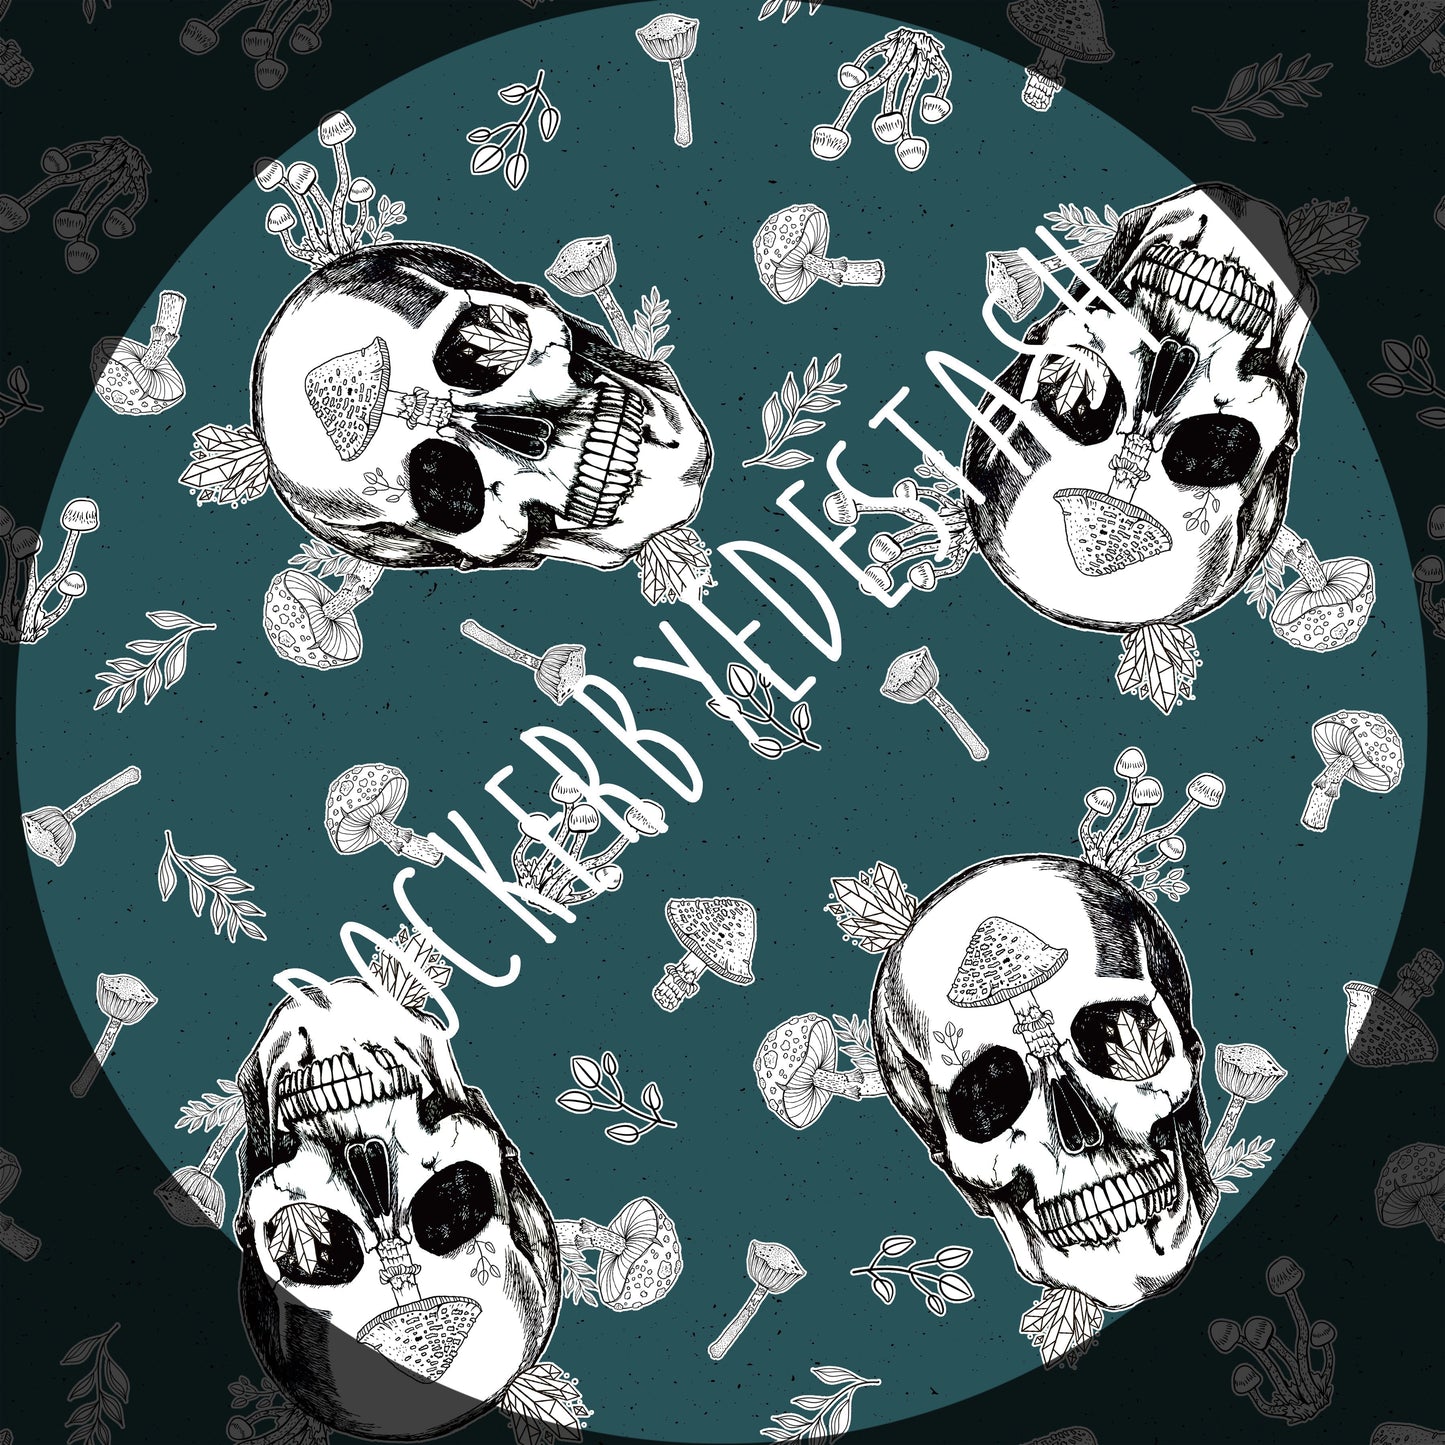 Vinyl - Round OO - Skulls & Shrooms, Magical Forest, New Wilderness & Hedgies - Fabric Retail